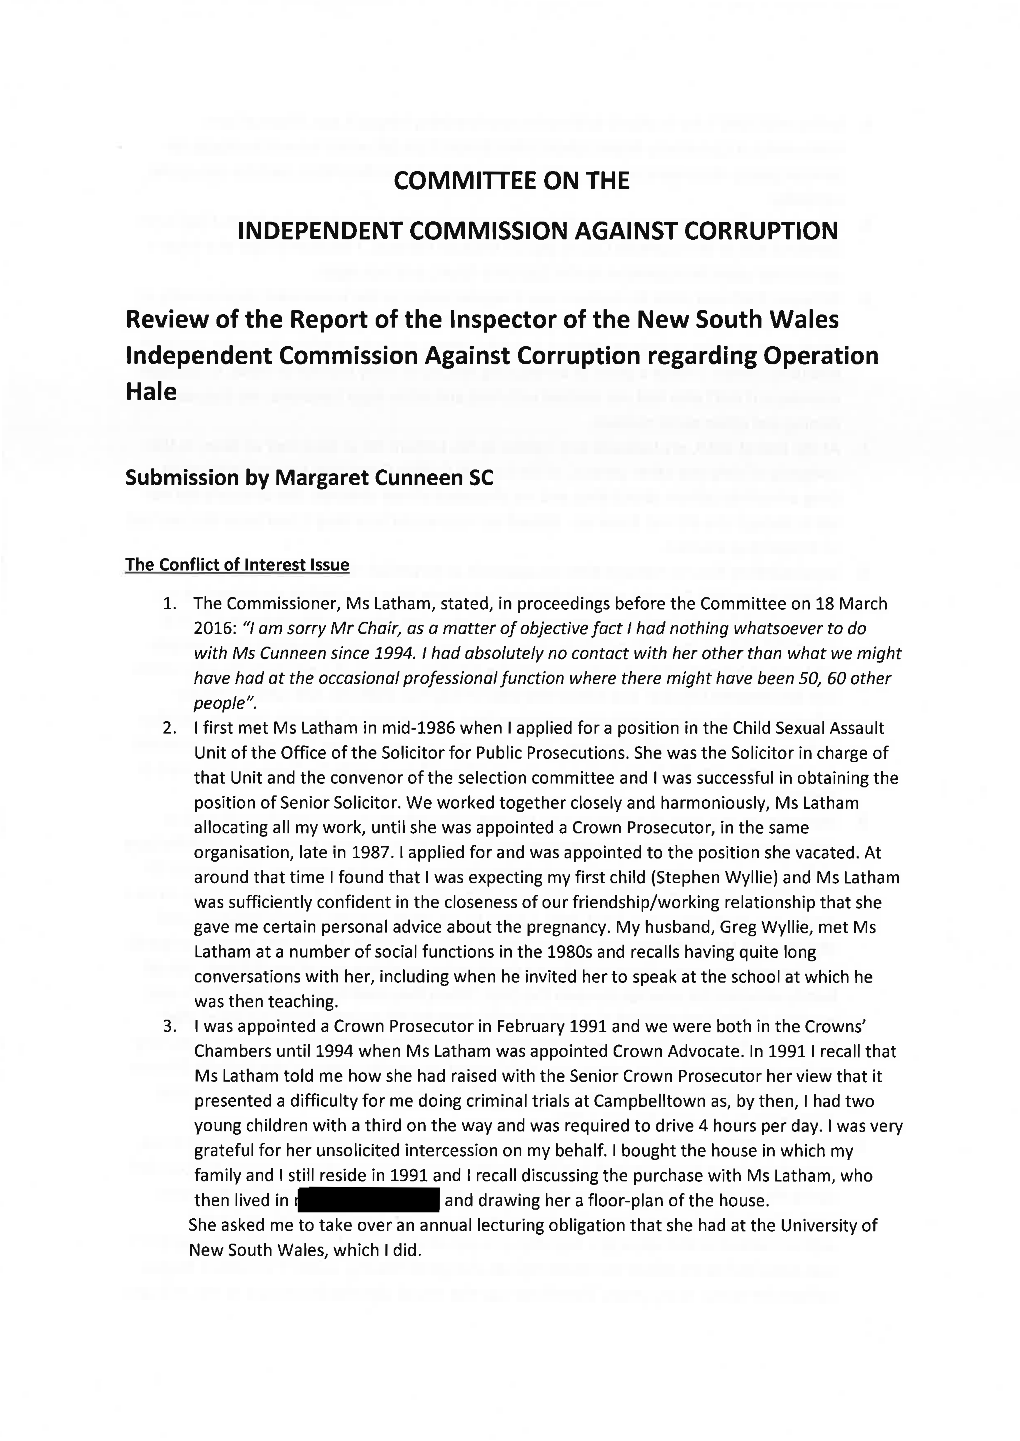 Review of the Report of the Inspector of the New South Wales Independent Commission Against Corruption Regarding Operation Hale